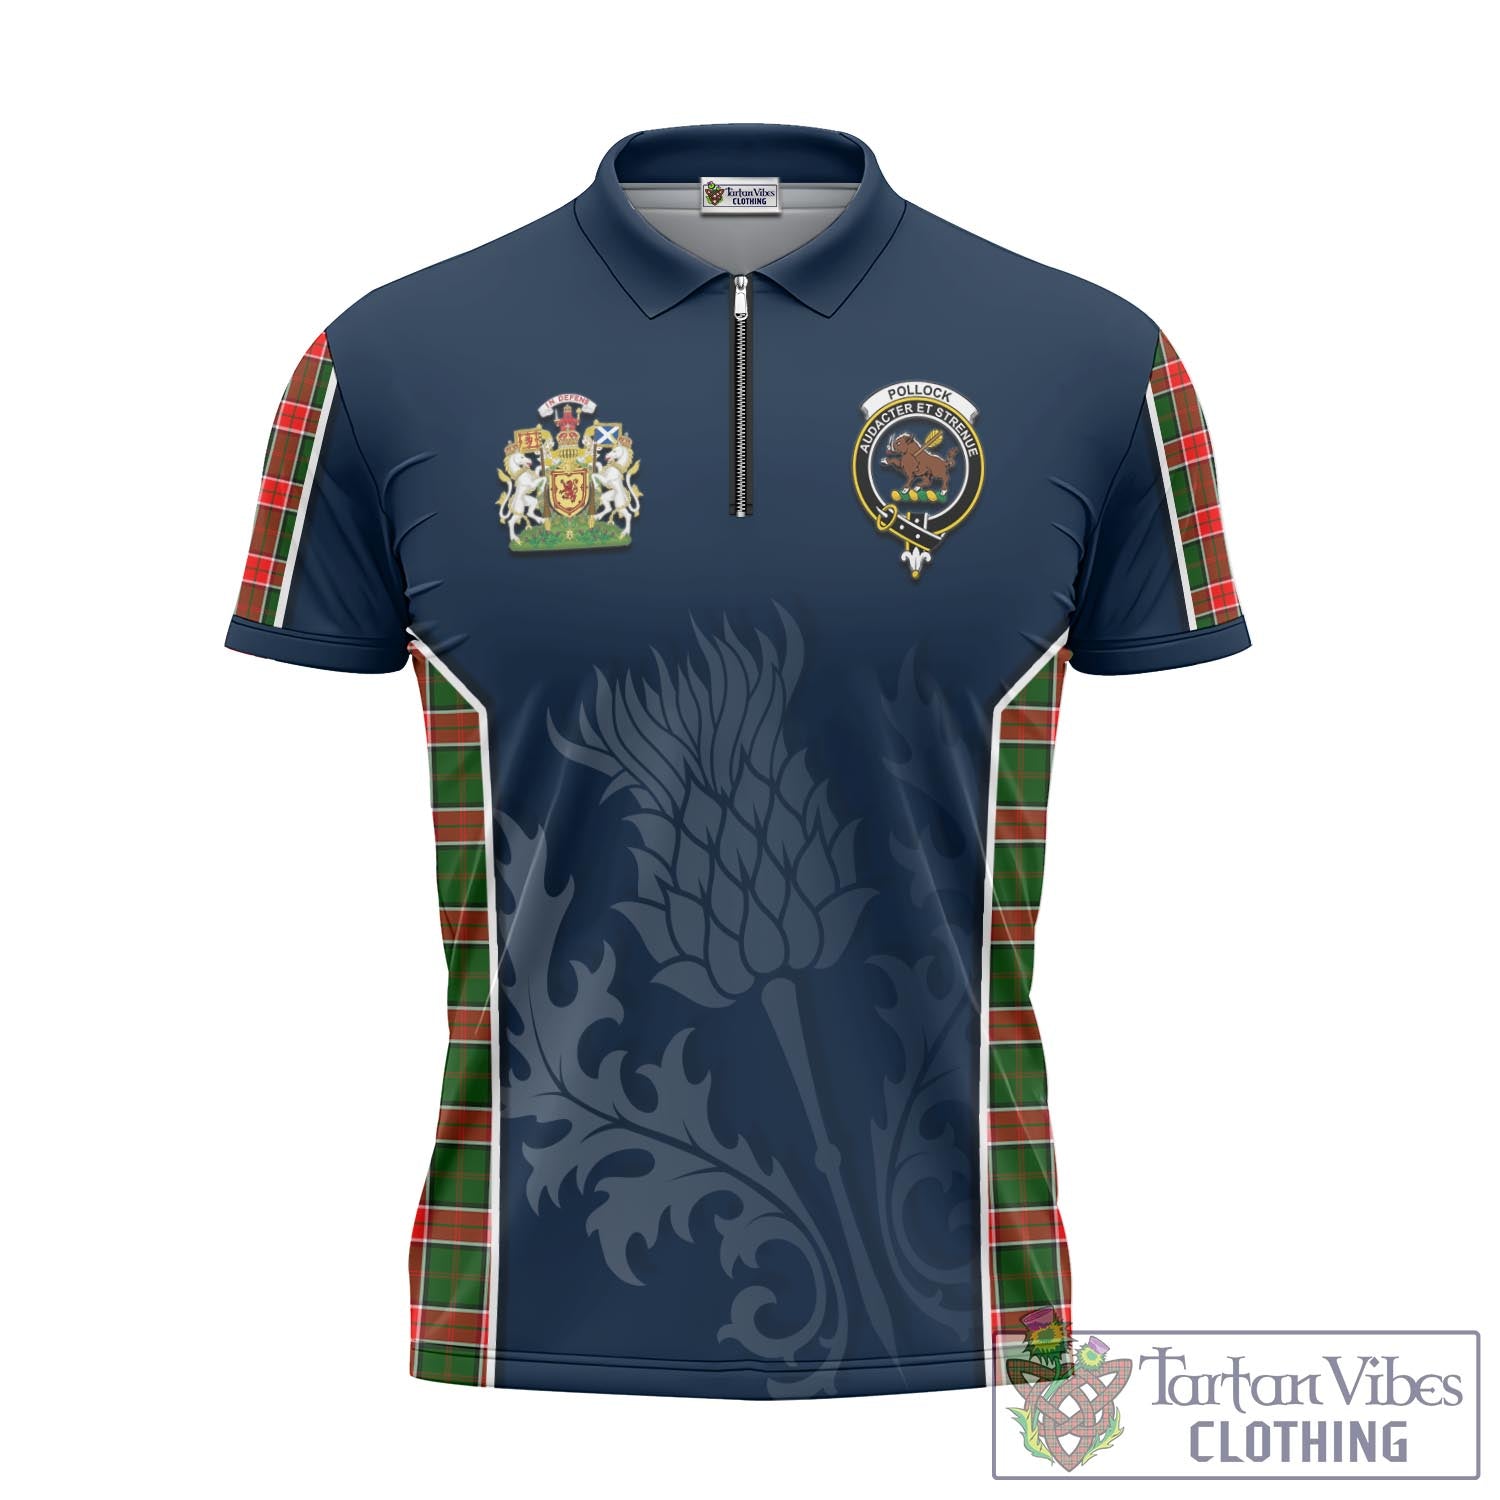 Tartan Vibes Clothing Pollock Modern Tartan Zipper Polo Shirt with Family Crest and Scottish Thistle Vibes Sport Style